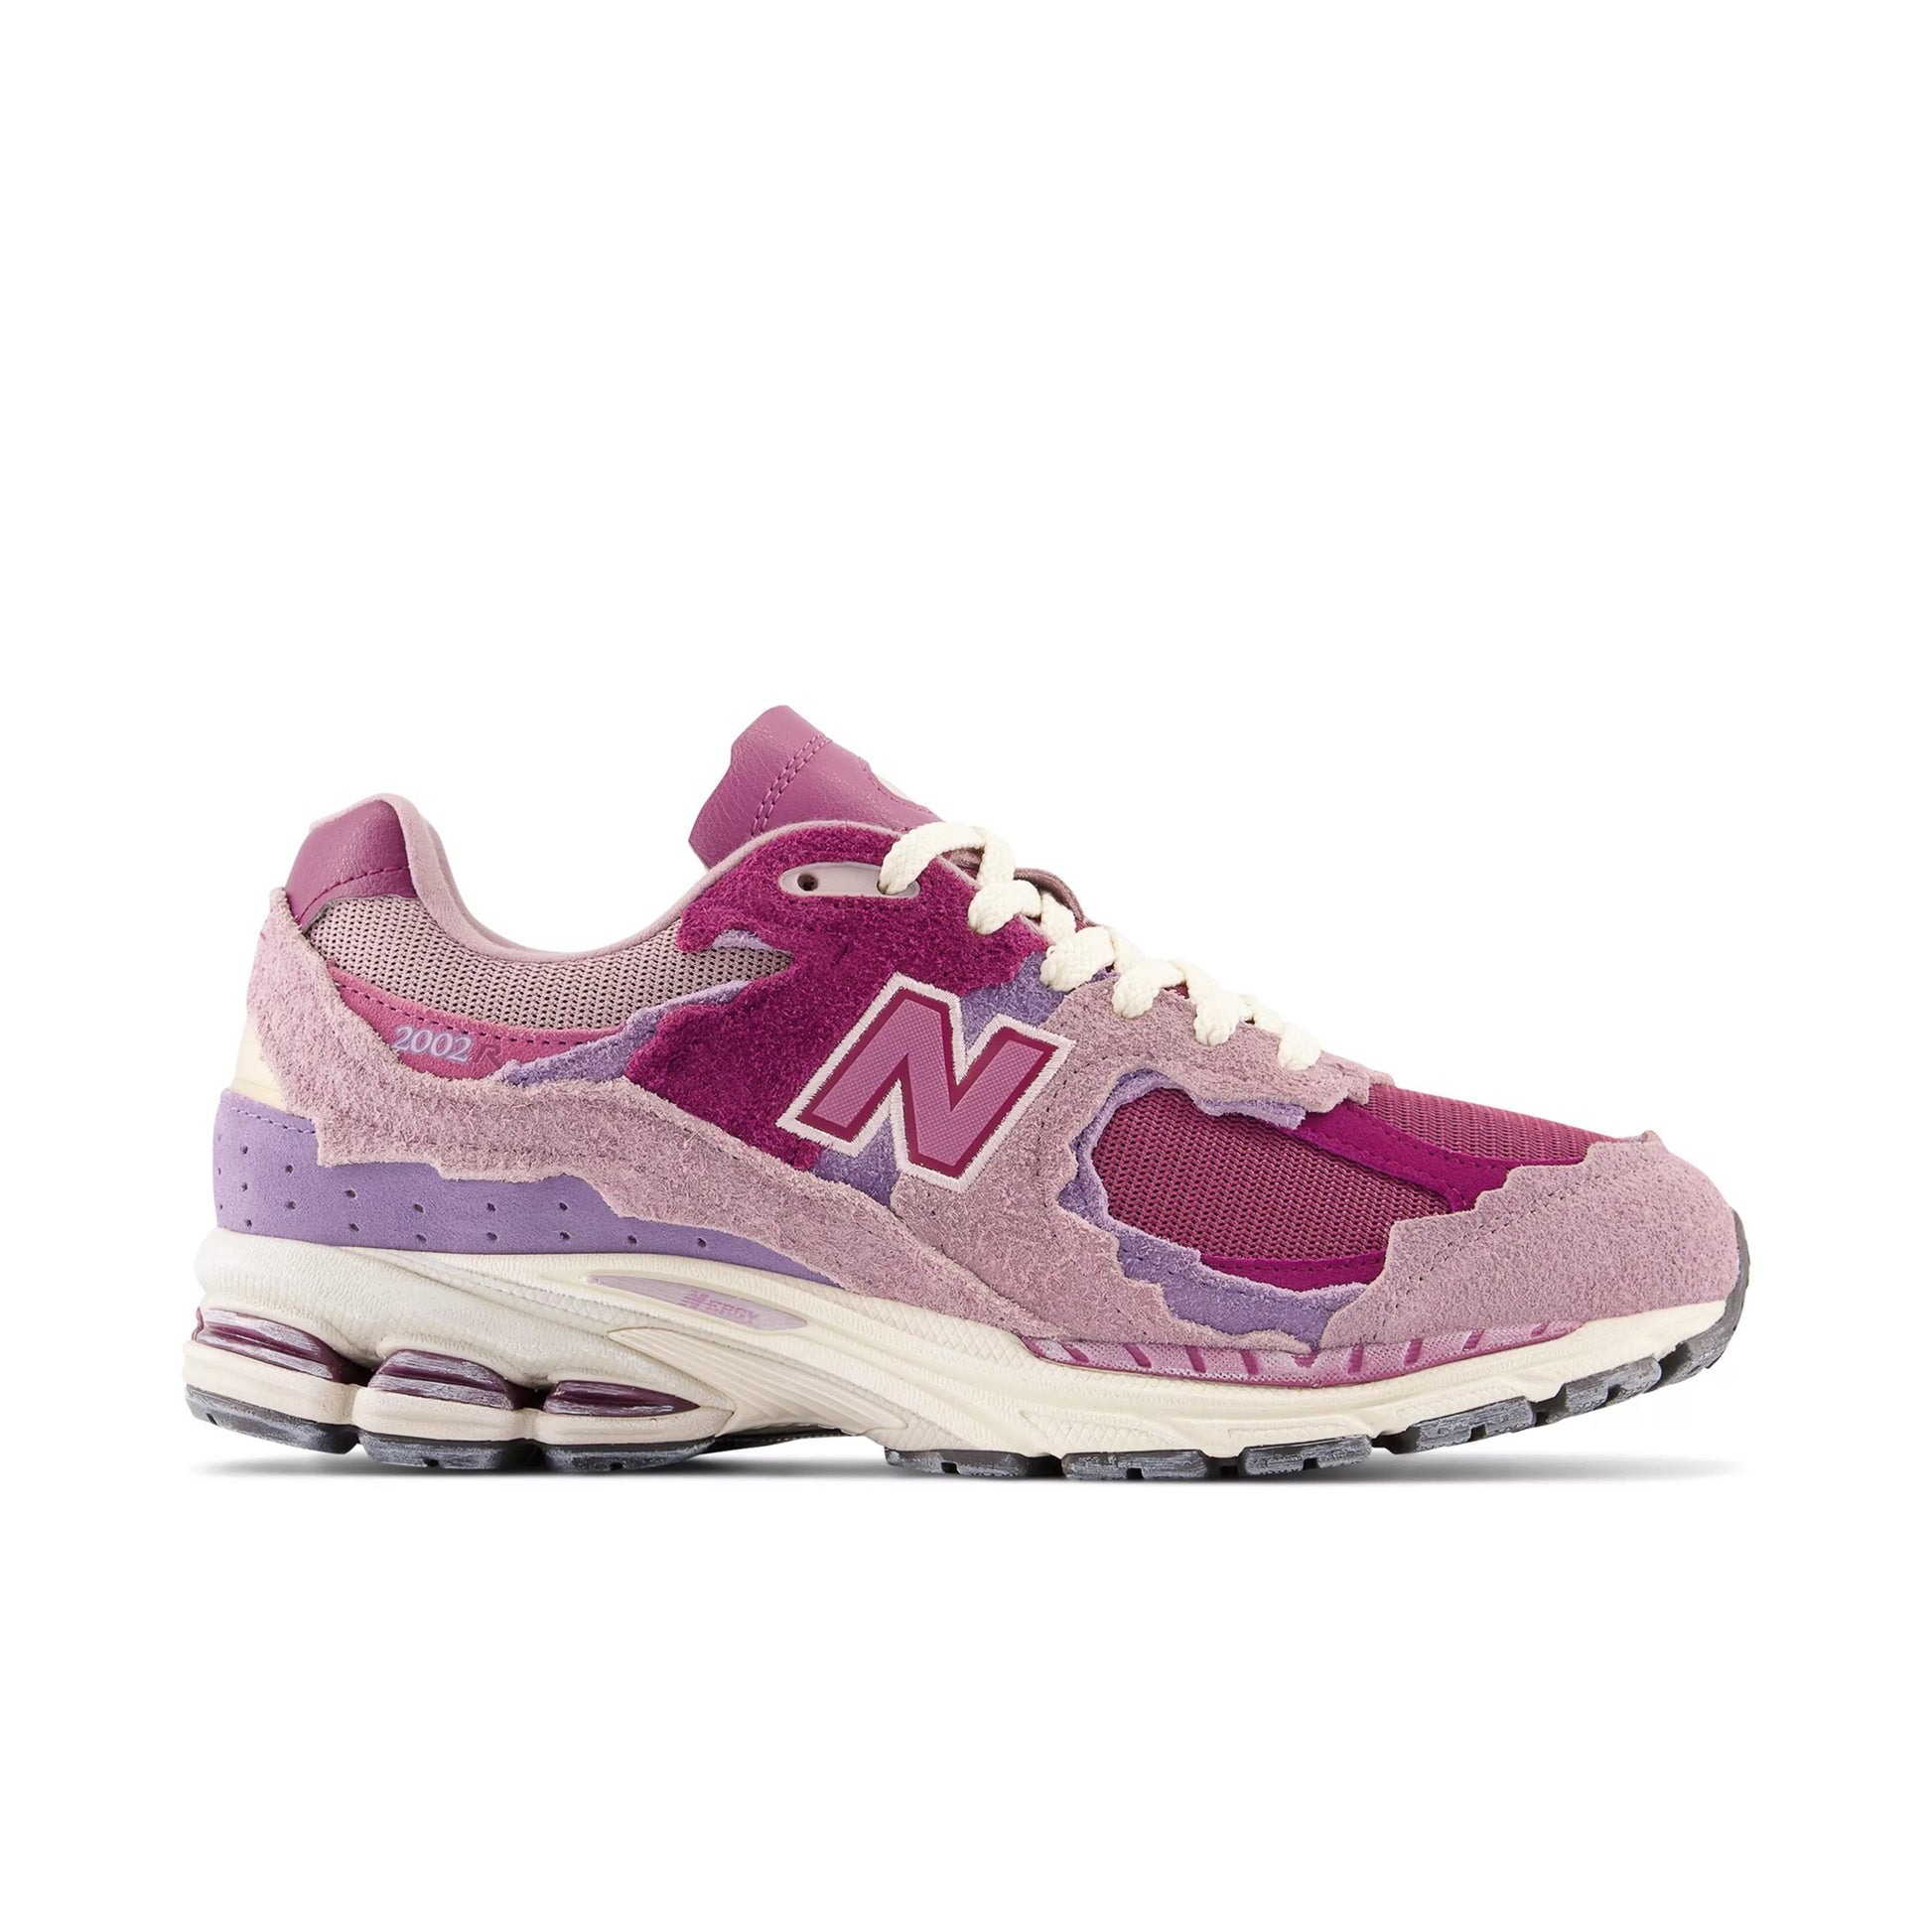 nb protection pack 2002